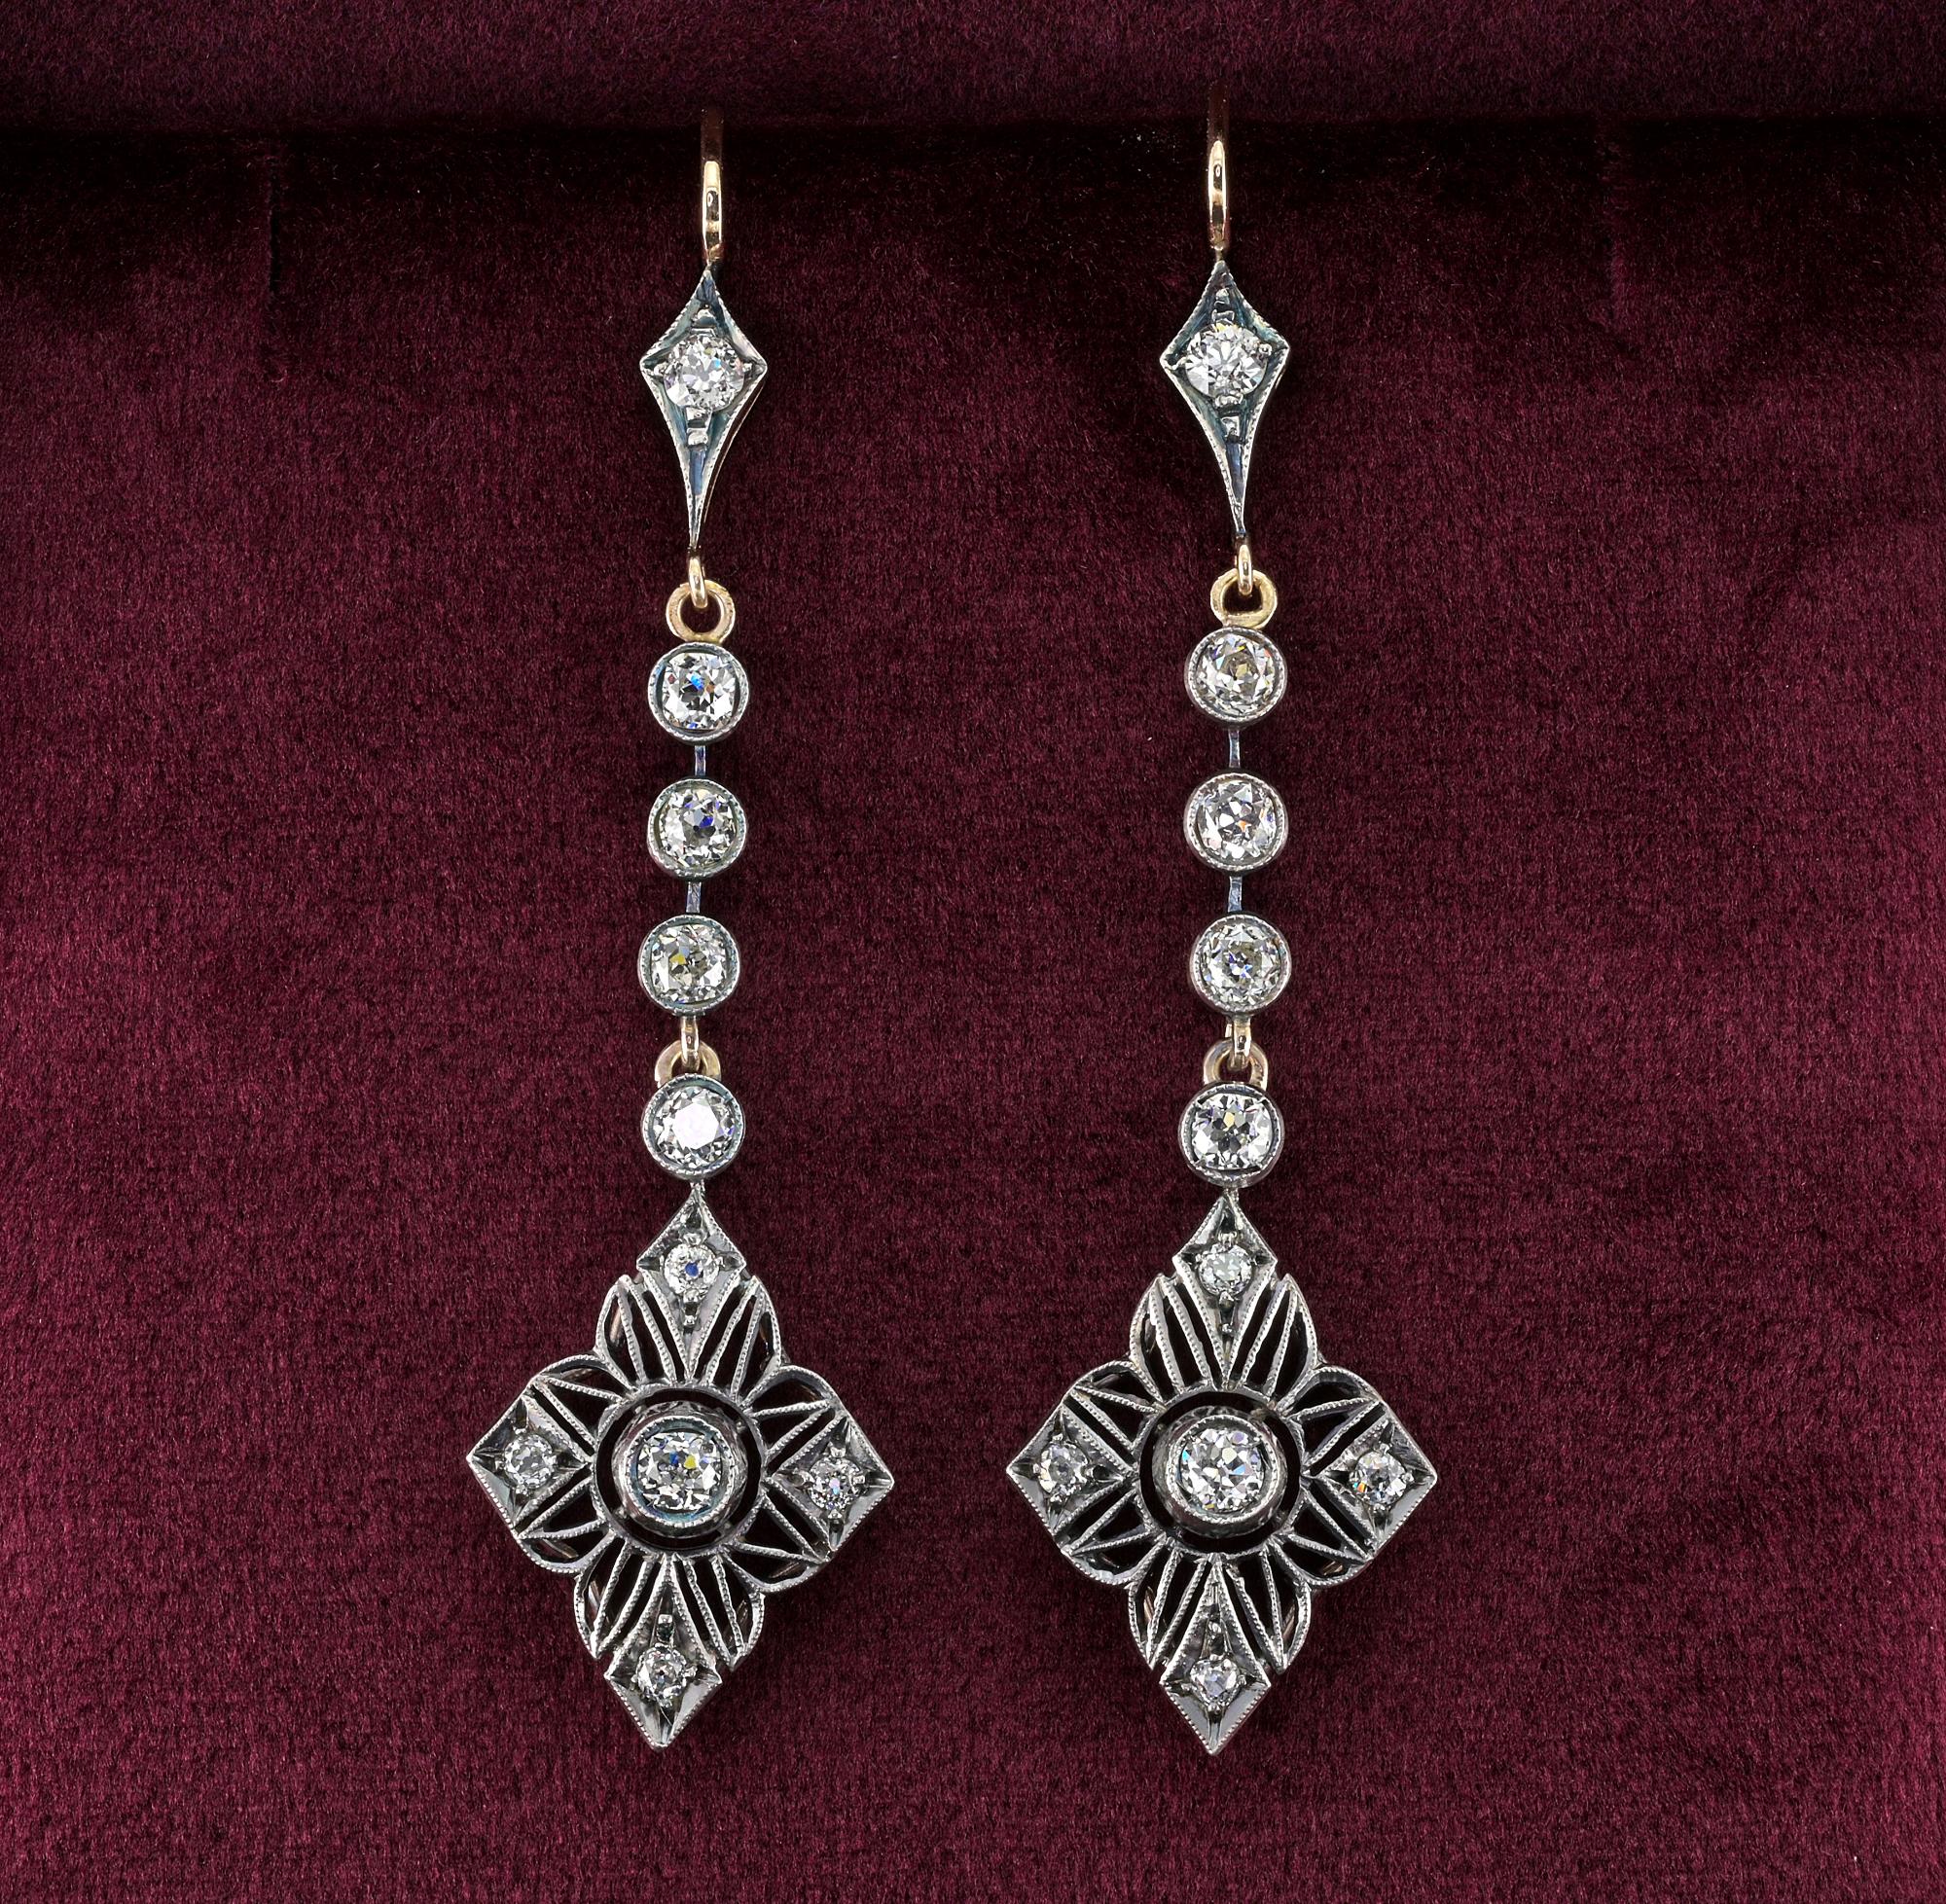 This outstanding pair of long drop earrings are 1900 ca
Beautifully hand crafted of solid 18 KT gold and silver portions
Long Diamond line leading to the main drop of naturalistic shape
Holding 2.90 Ct of antique Diamonds in total, all old mine cut